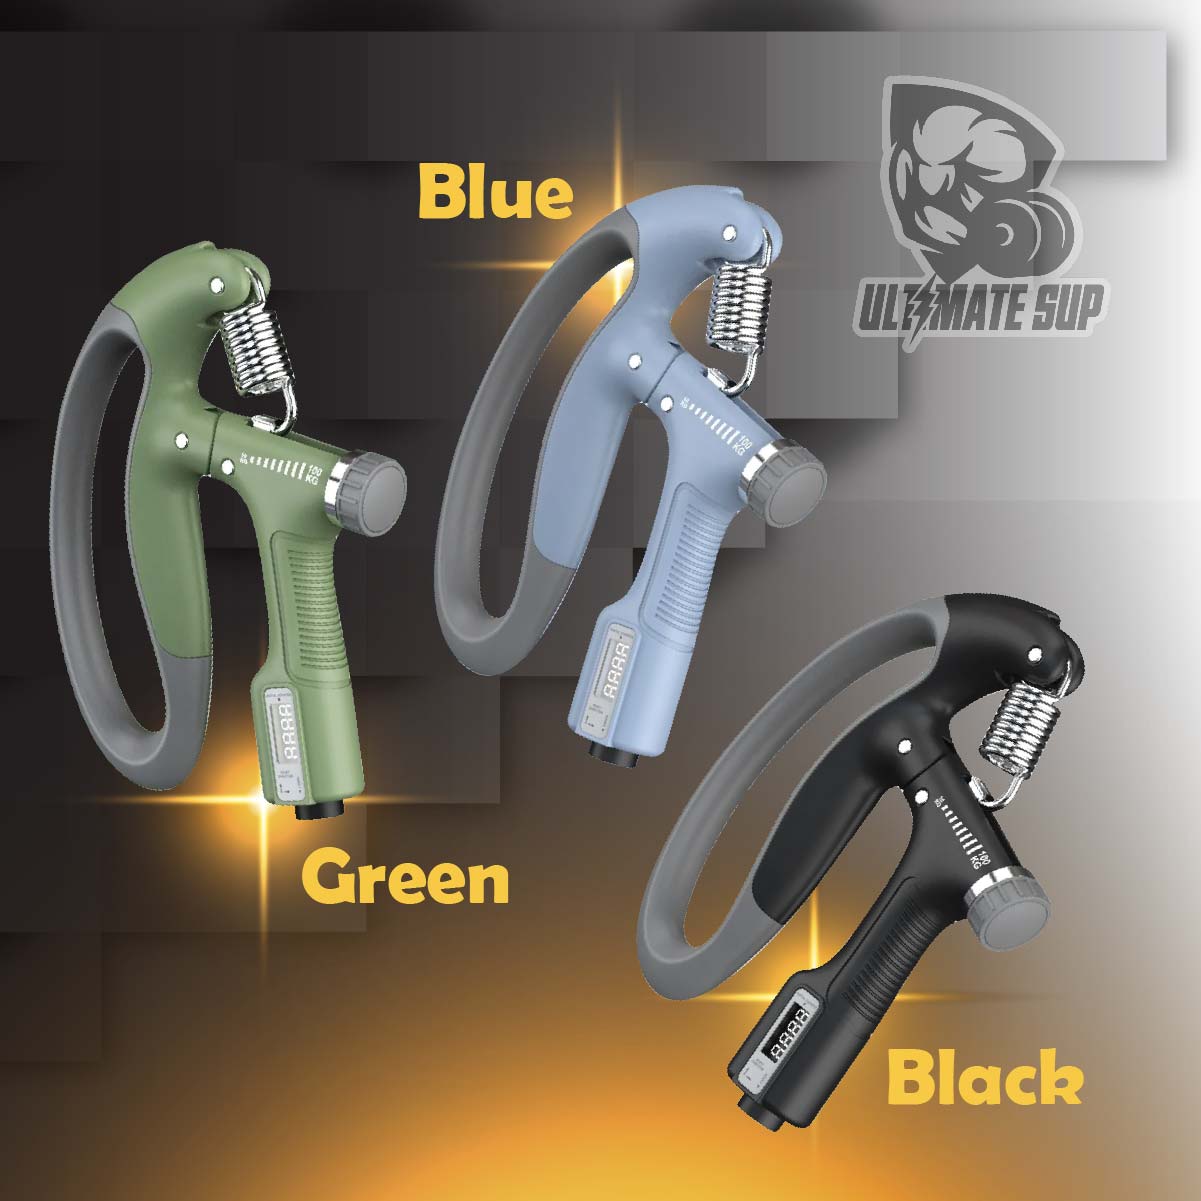 Ultimate Sup, Hand Grip, Hand Grip Strengthener, Hand Exercise, Finger Exercise, Finger Stretcher, Finger Gripper - Colors